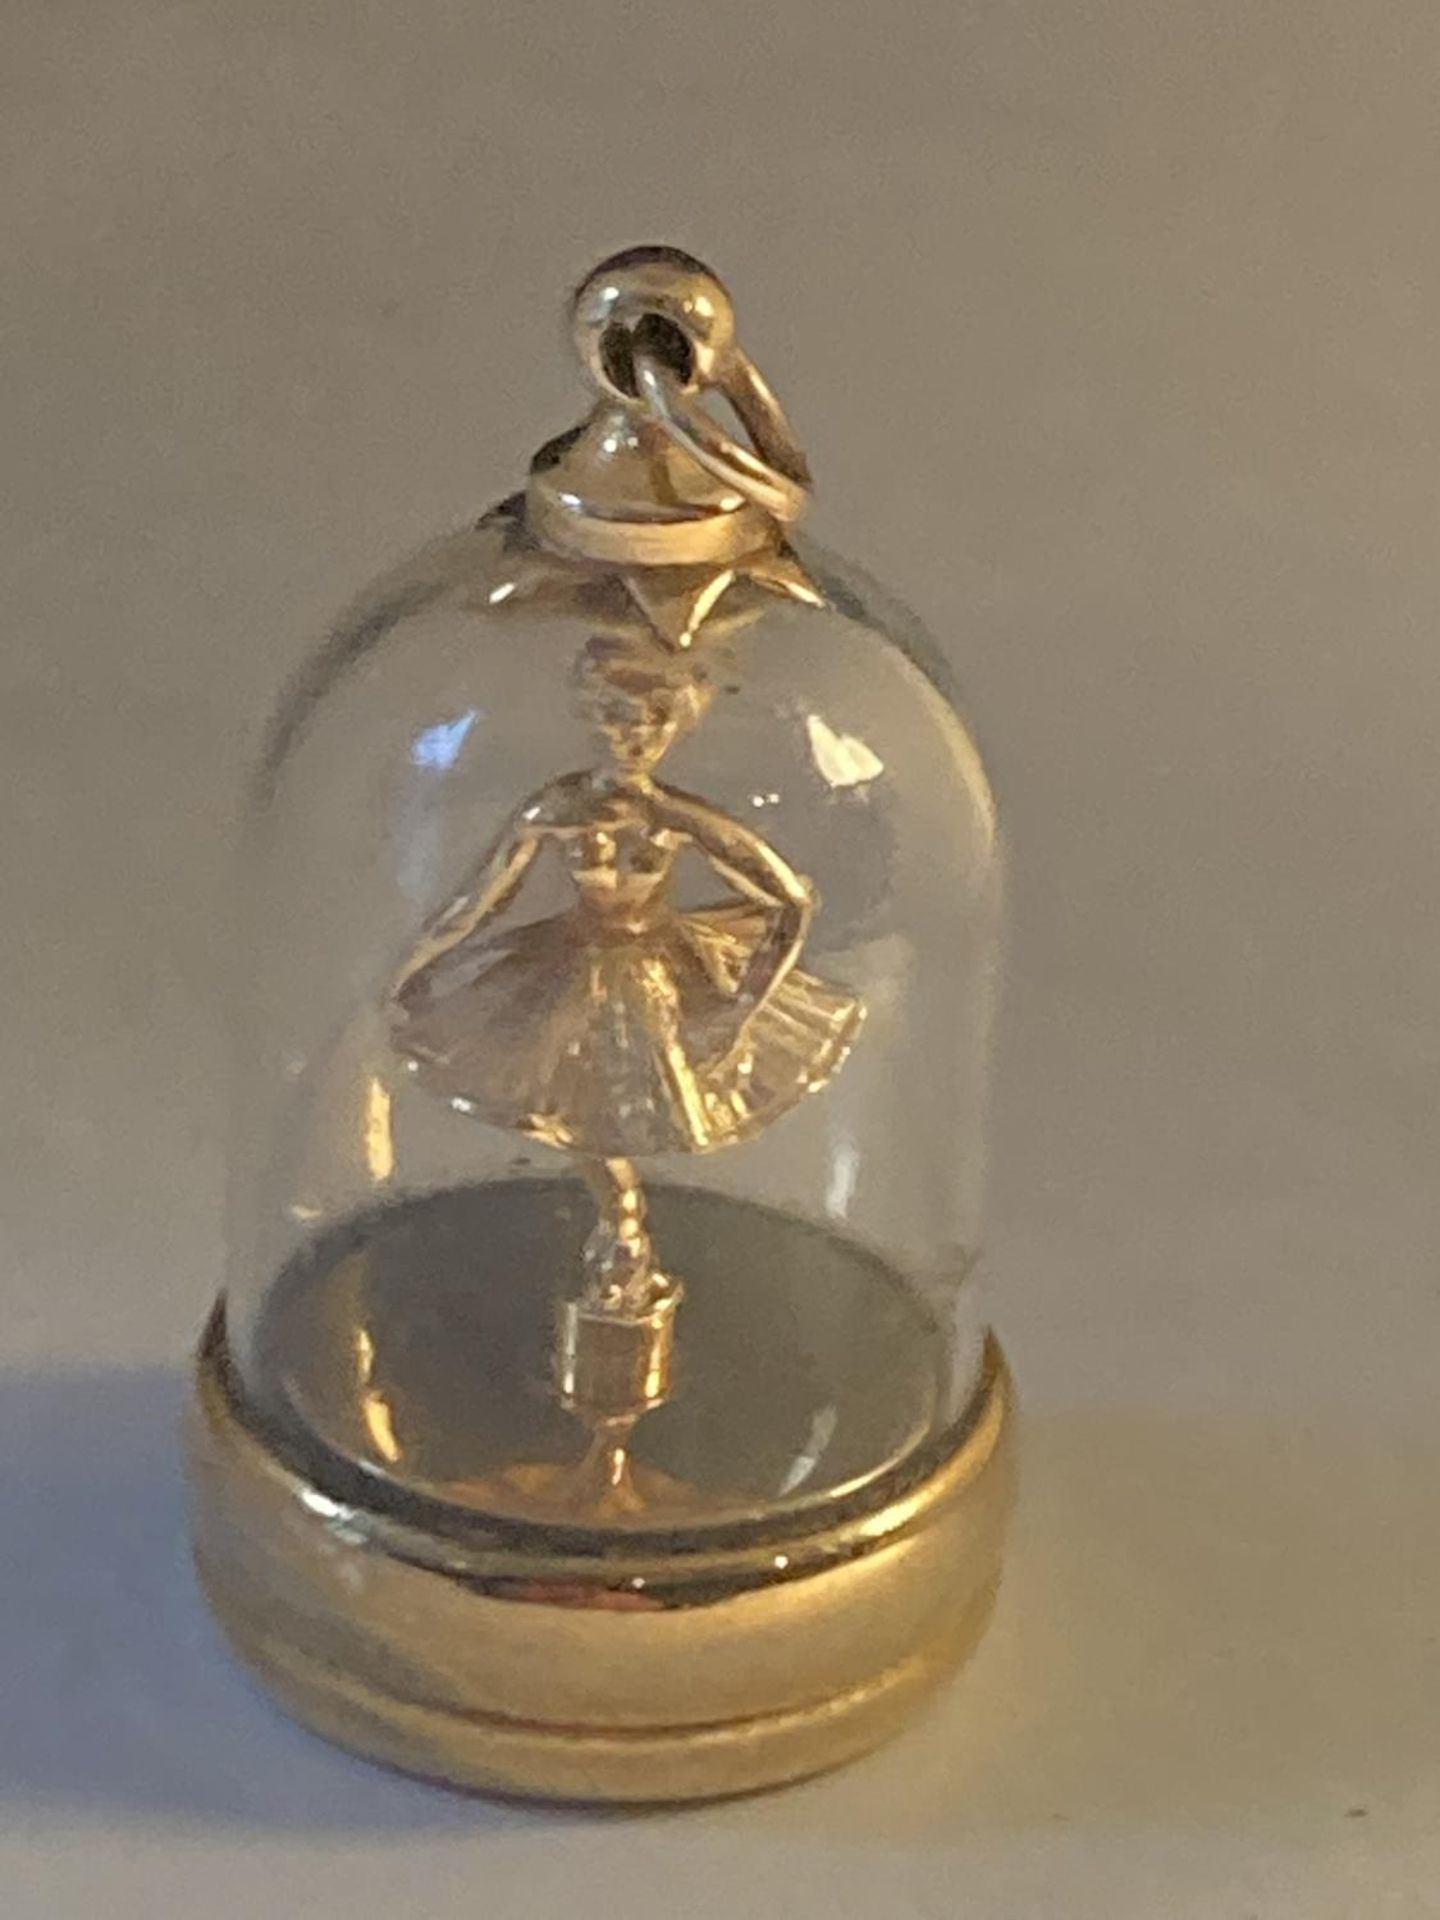 A 9 CARAT GOLD PENDANT WITH A BALLERINA IN A DOME GROSS WEIGHT 13.9 GRAMS